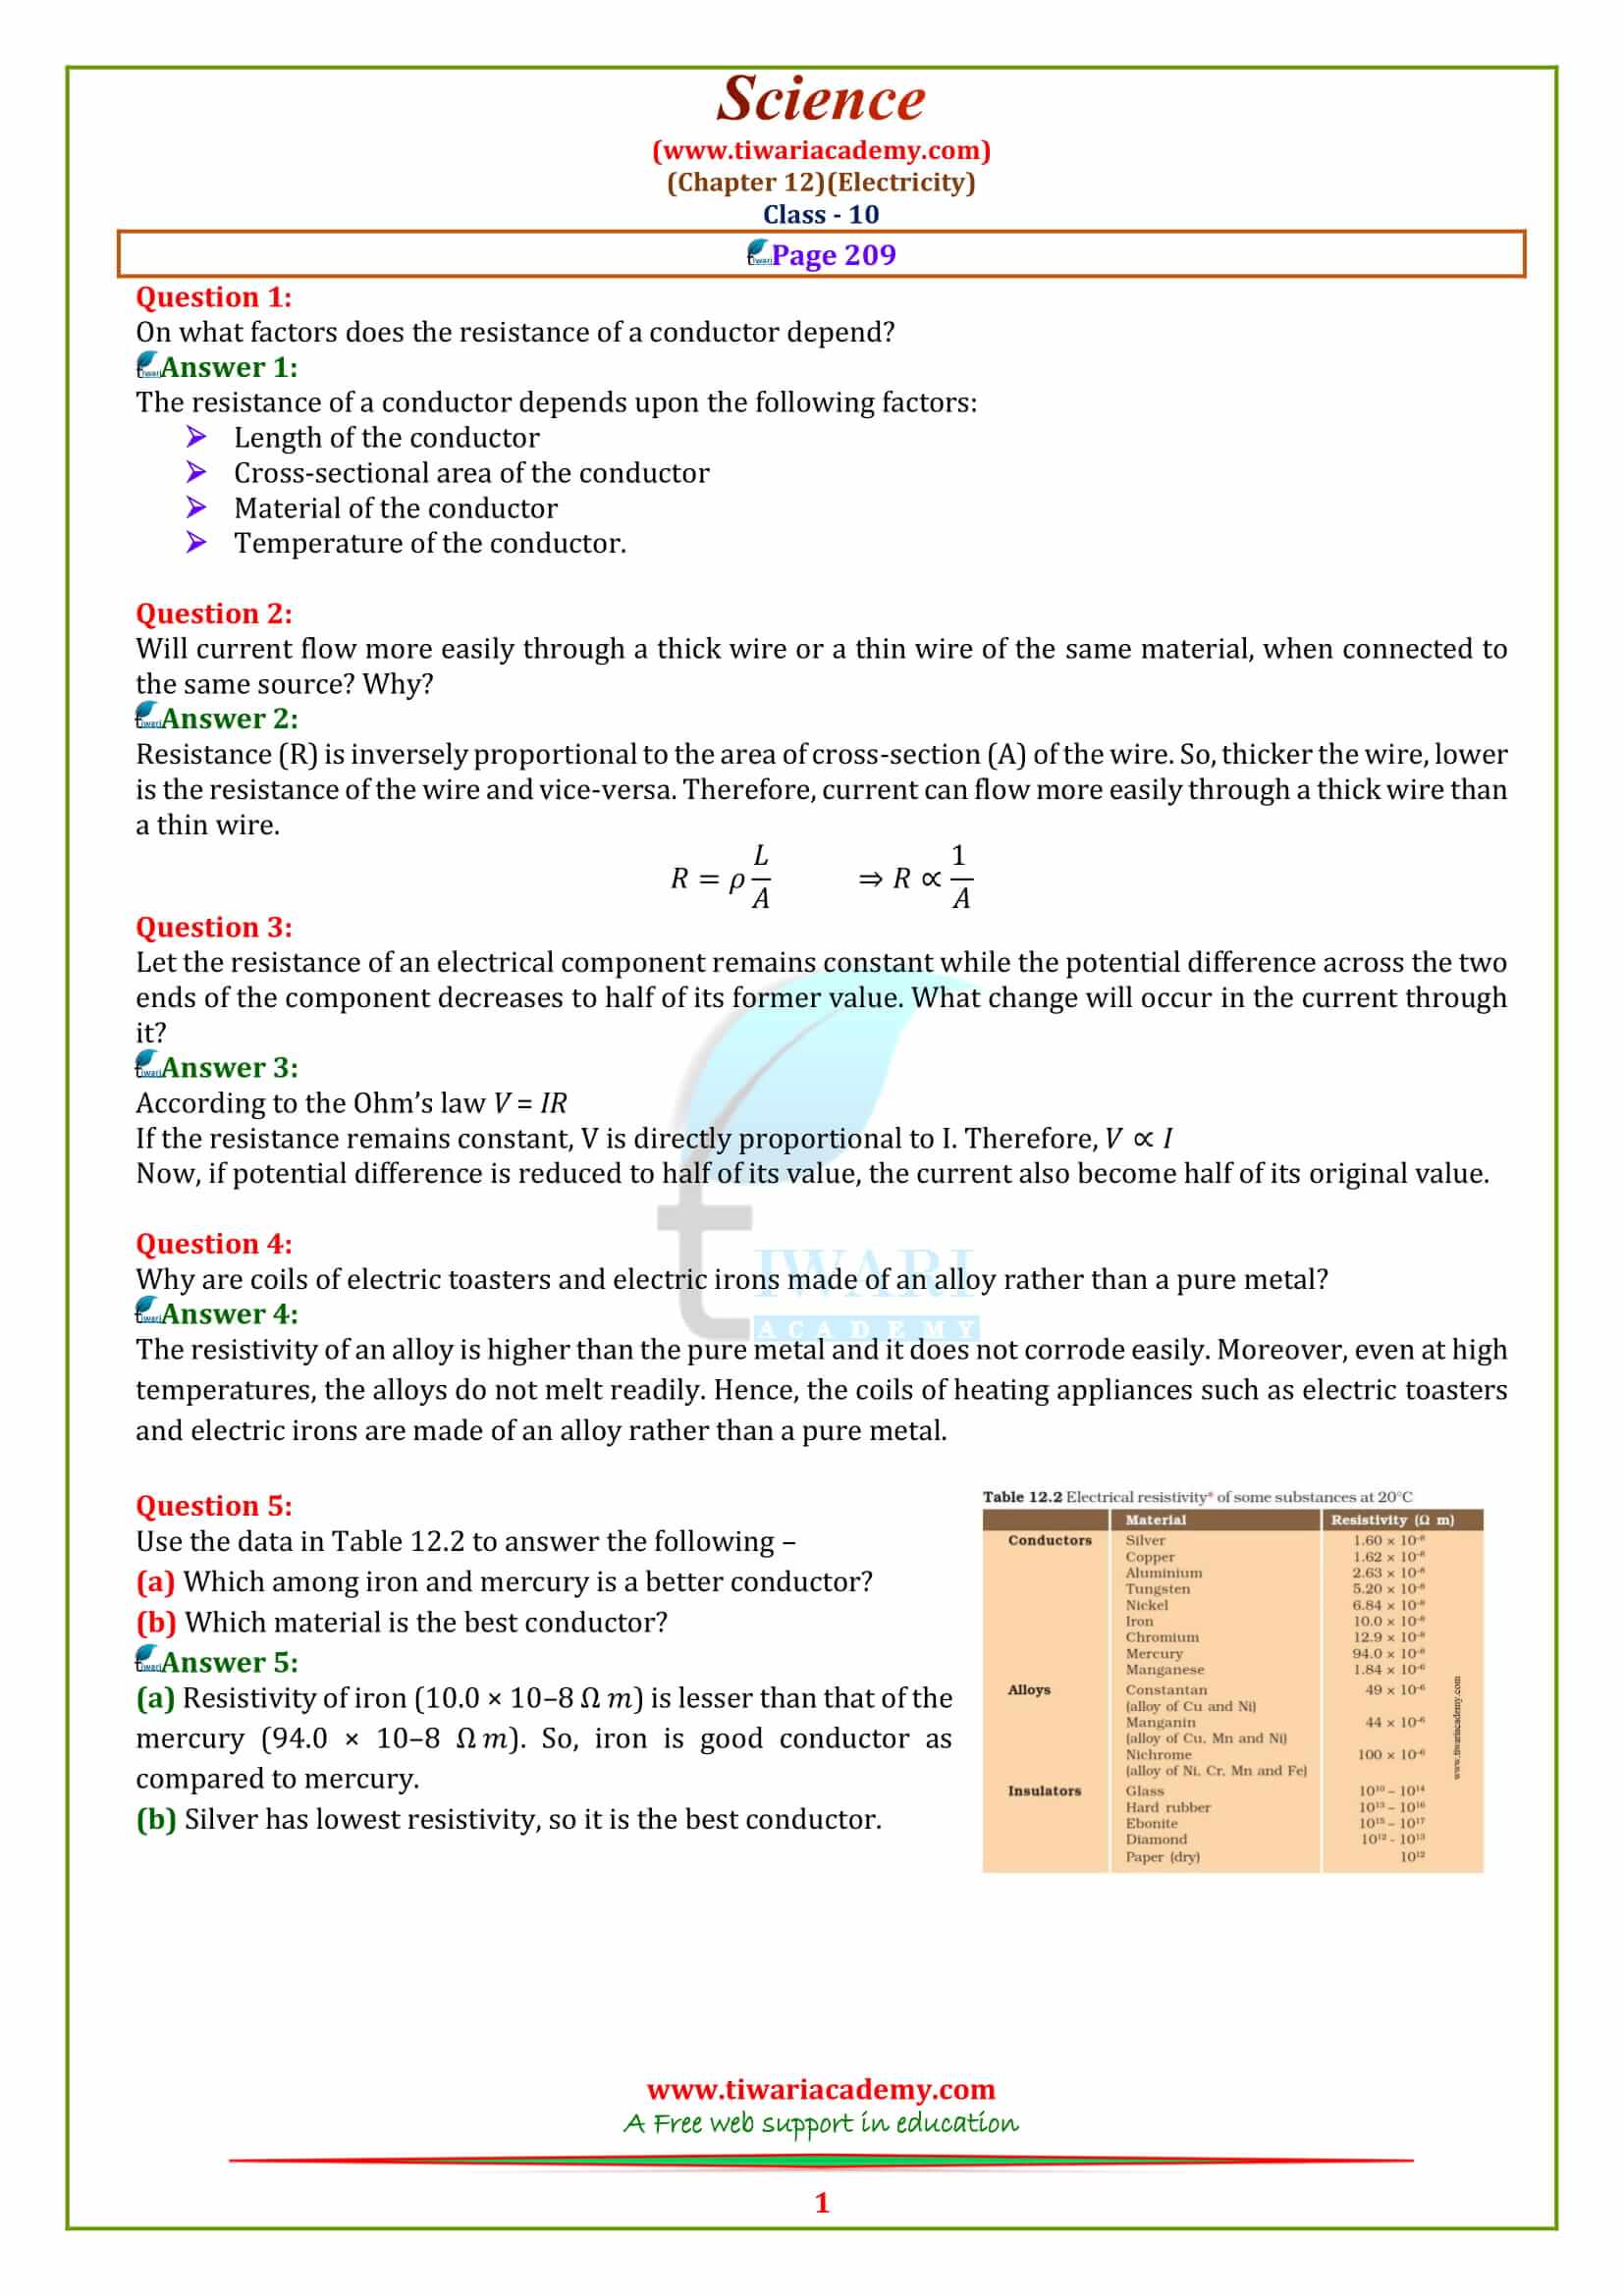 class 10 science chapter 12 case study questions